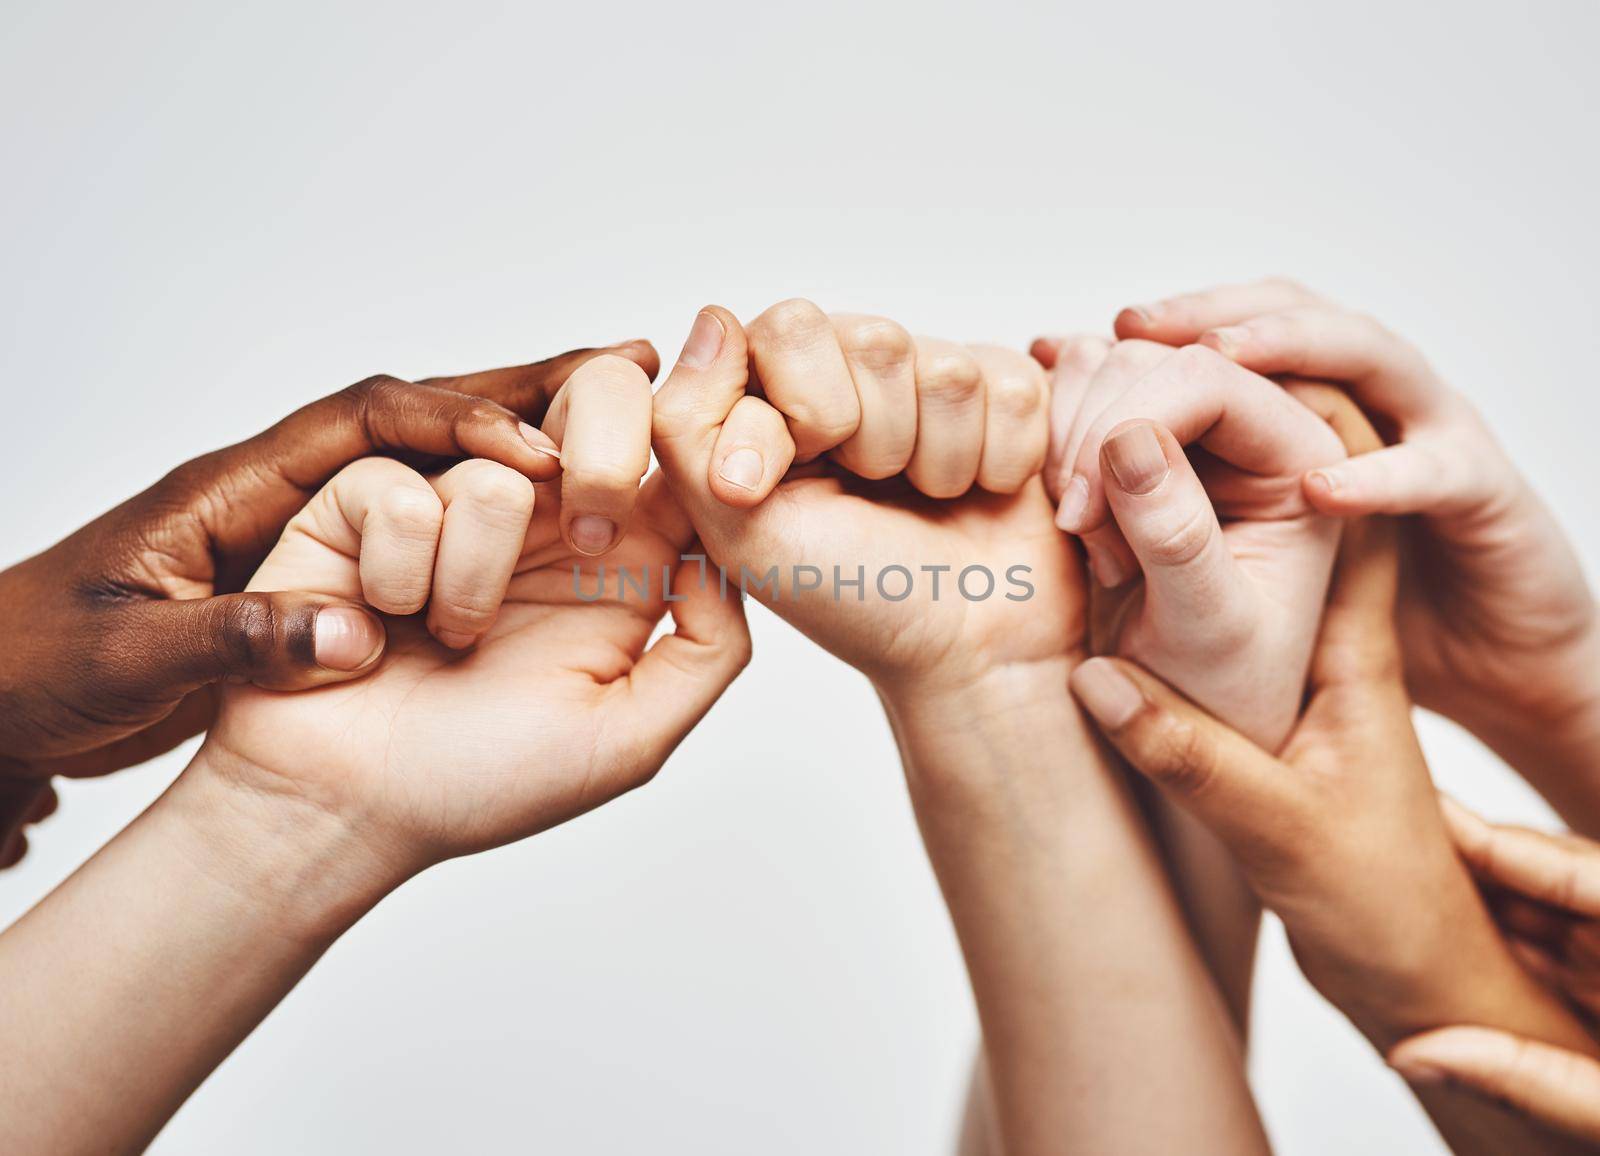 Hold on just a little longer. a group of hands holding onto each other against a white background